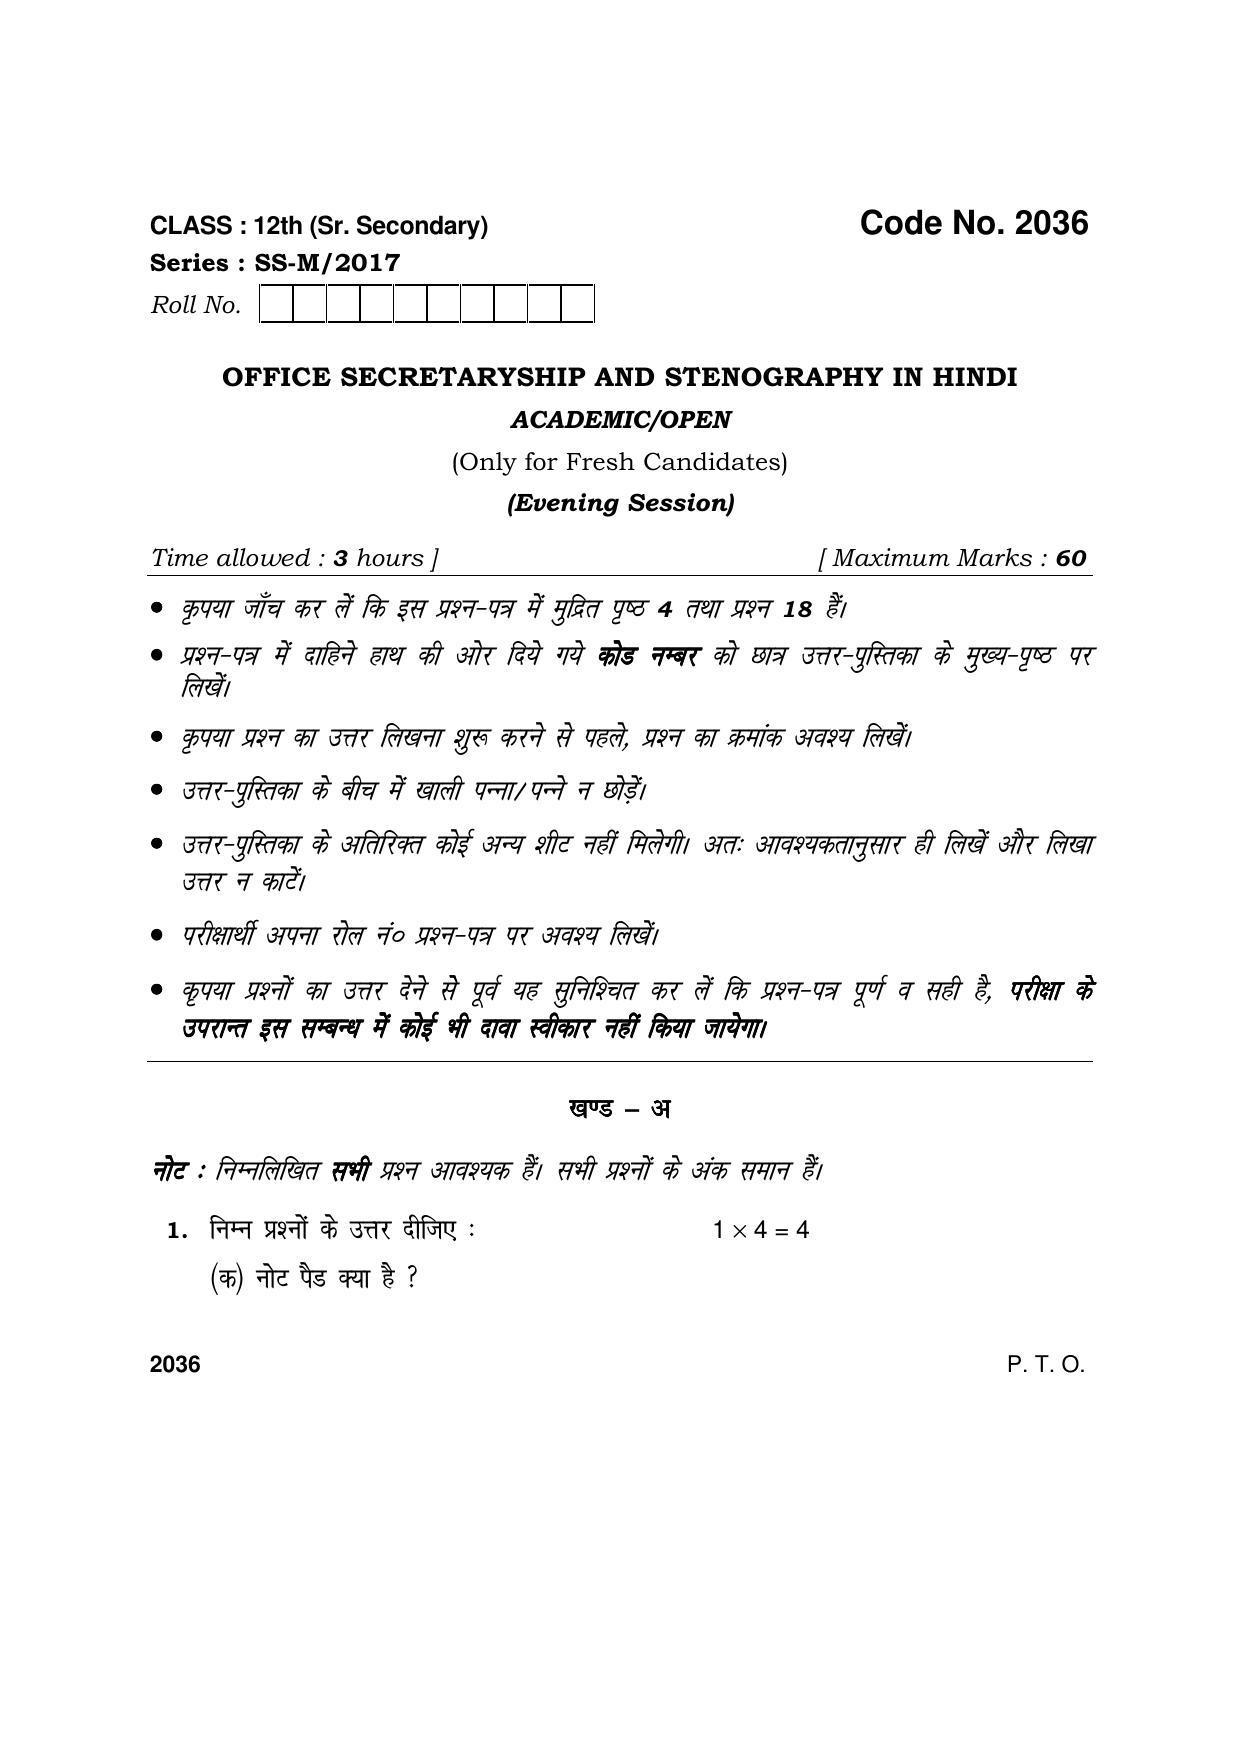 Haryana Board HBSE Class 12 Office Secretary-ship and Stenography in Hindi 2017 Question Paper - Page 1